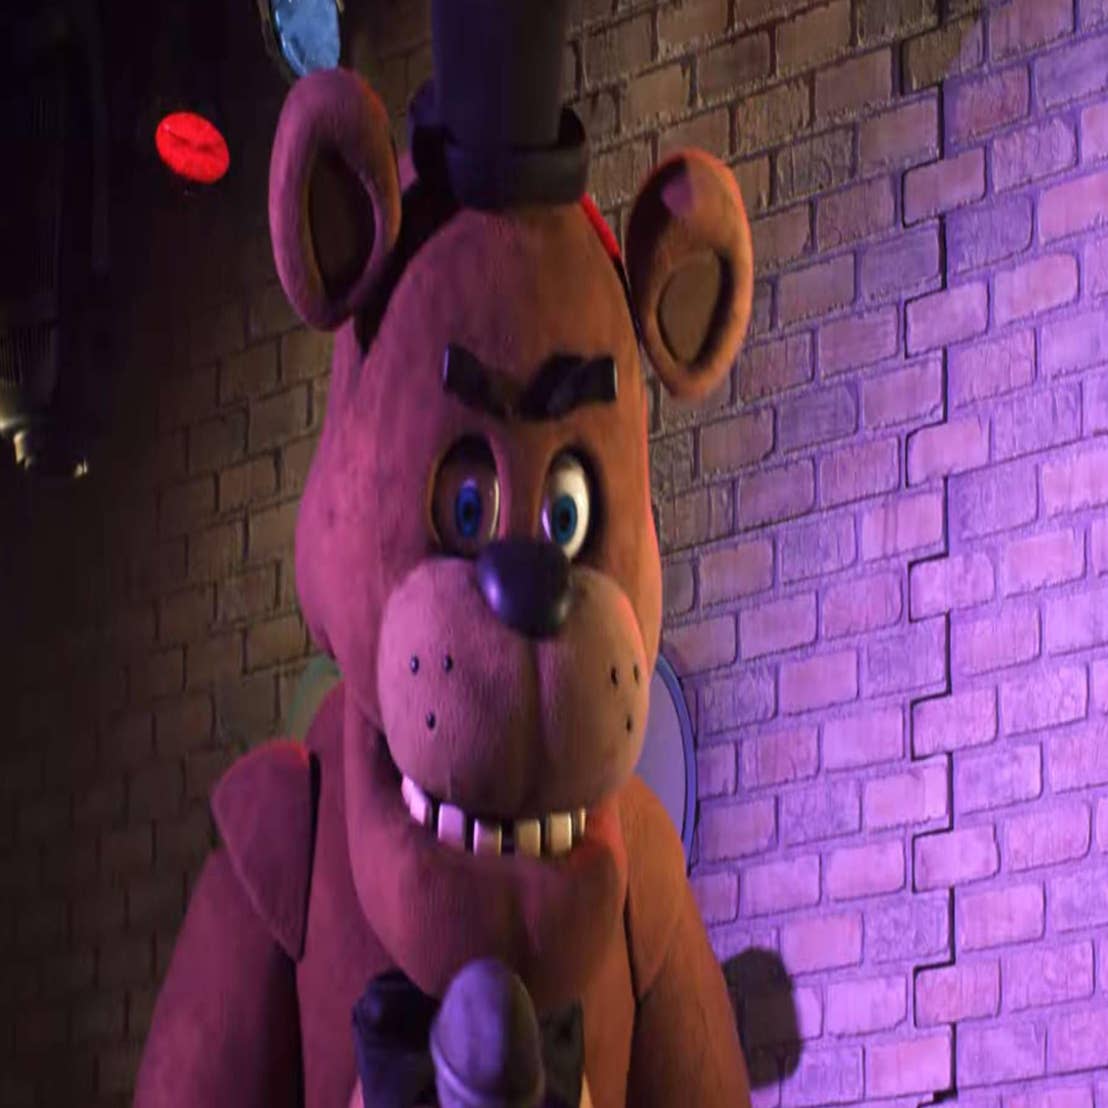 Is the Five Nights at Freddy's movie canon? Here's what we know